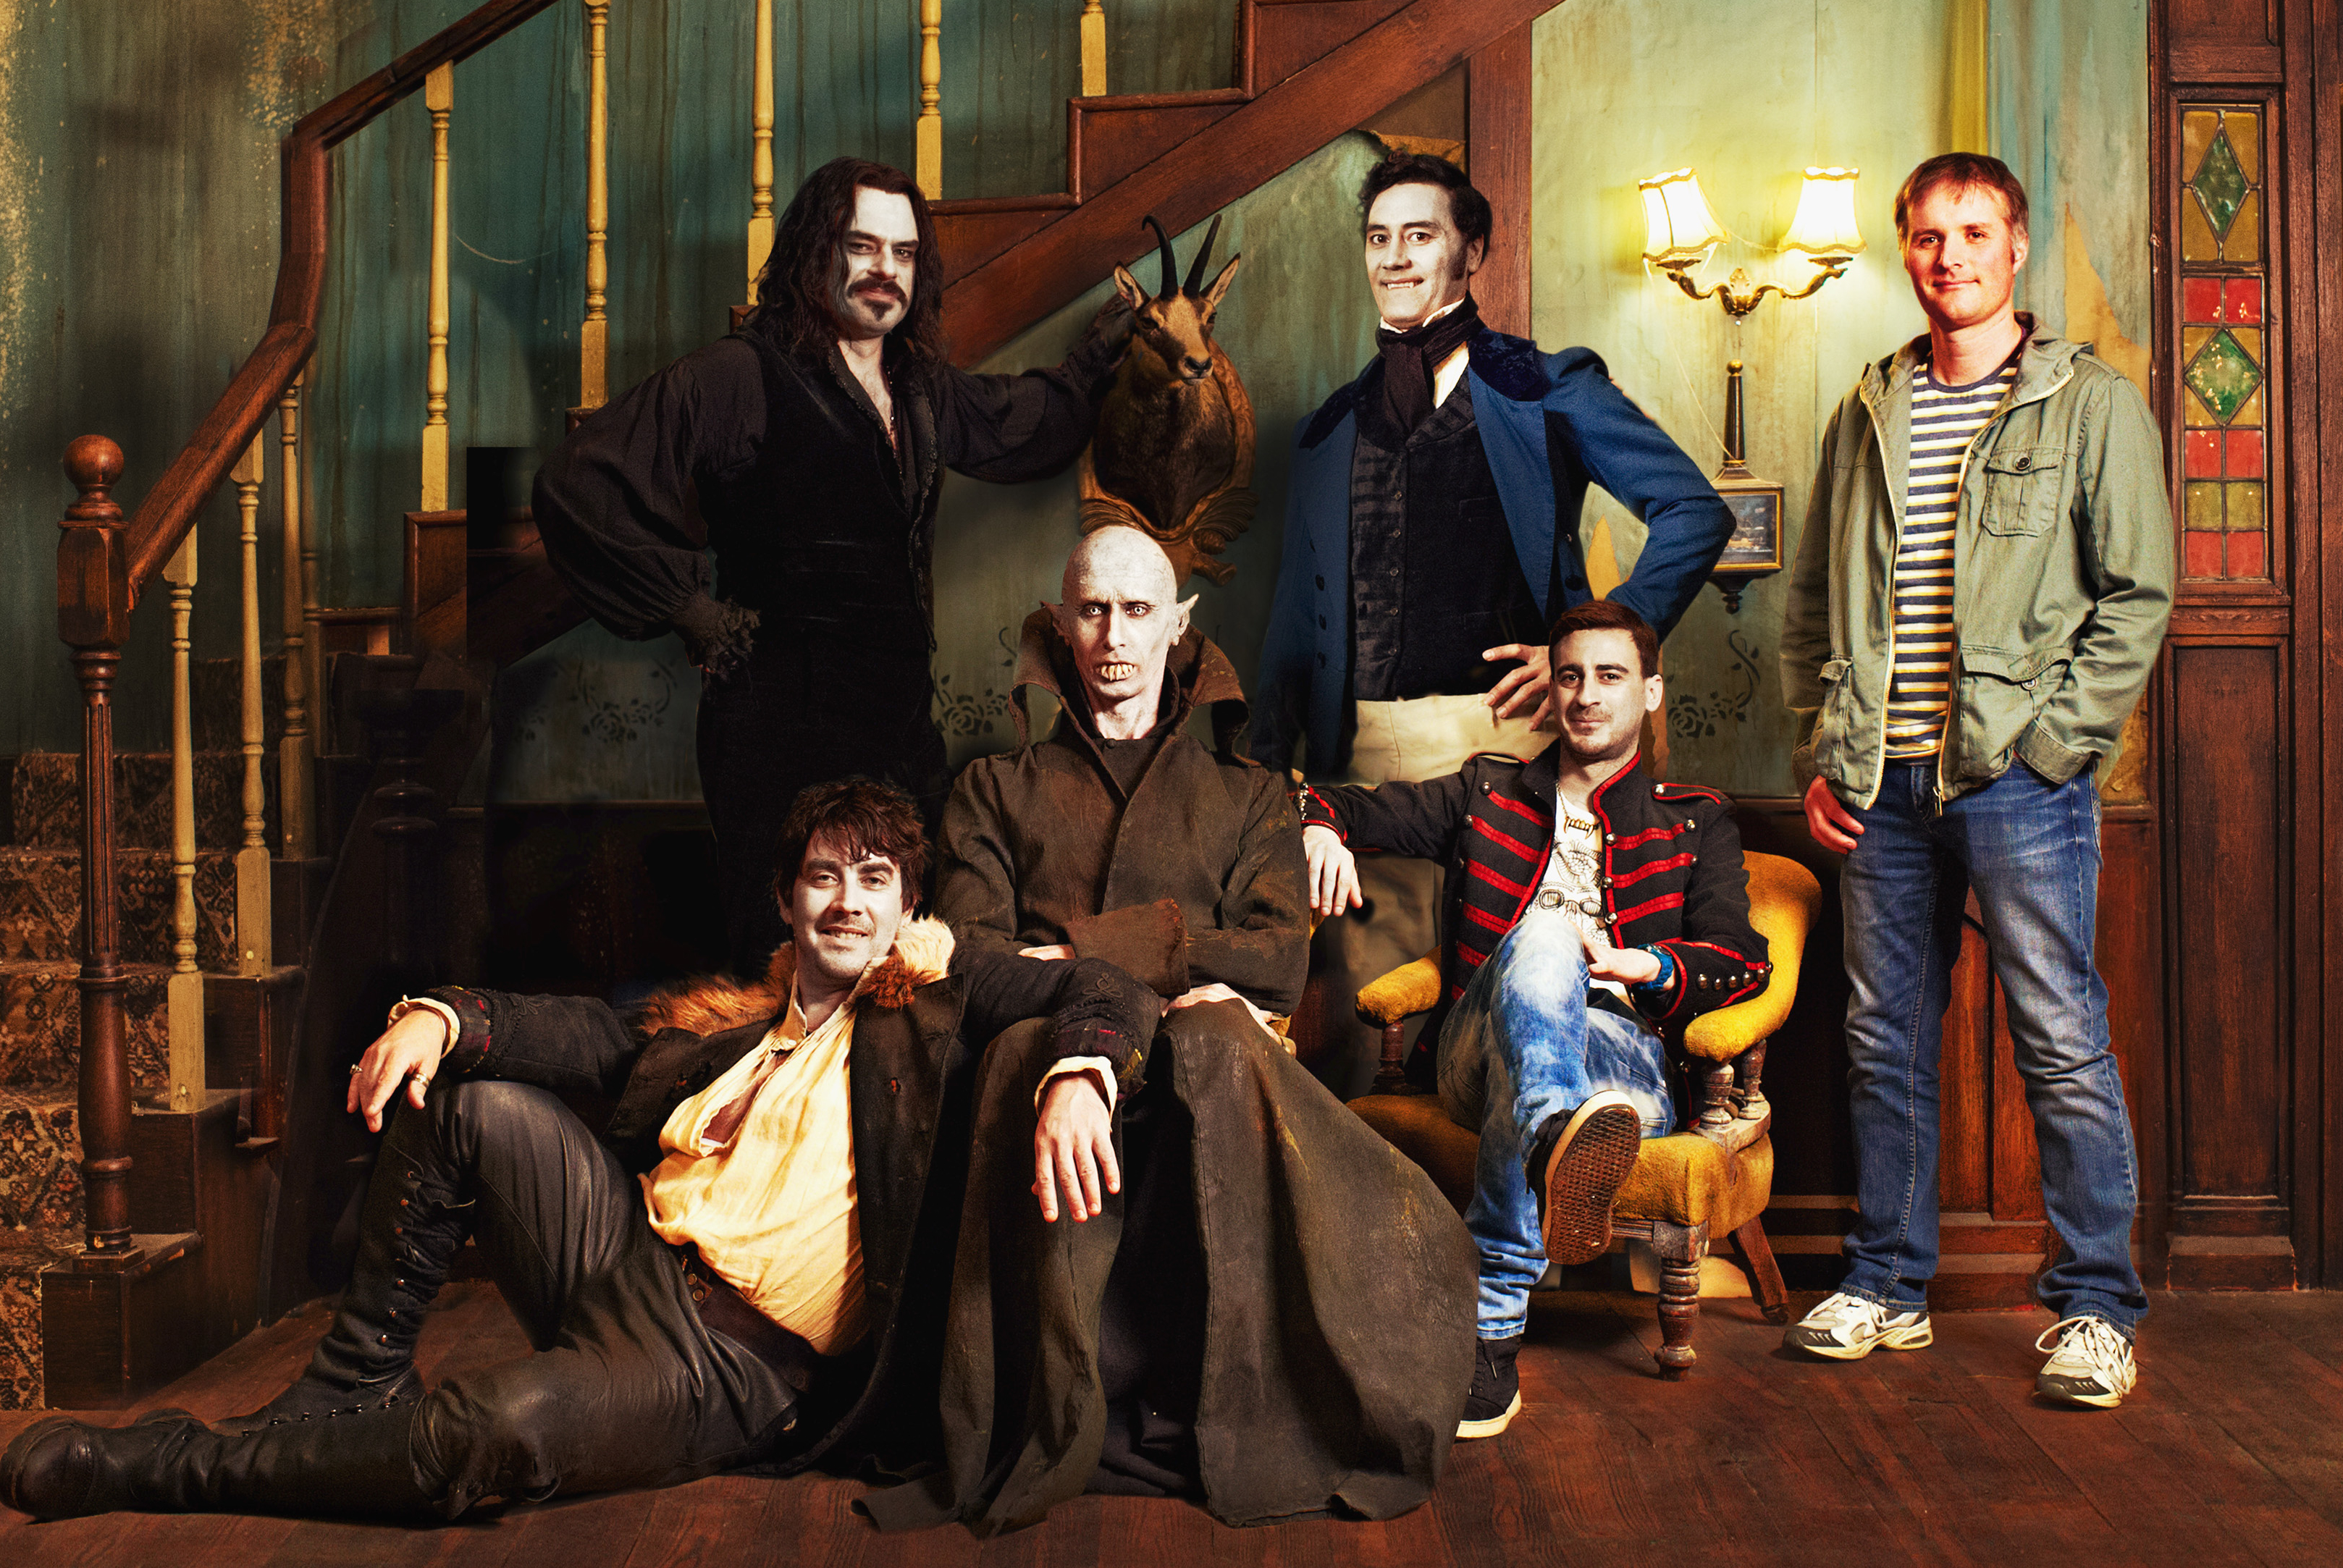 What We Do in the Shadows, de  Jemaine Clement y Taika Waititi